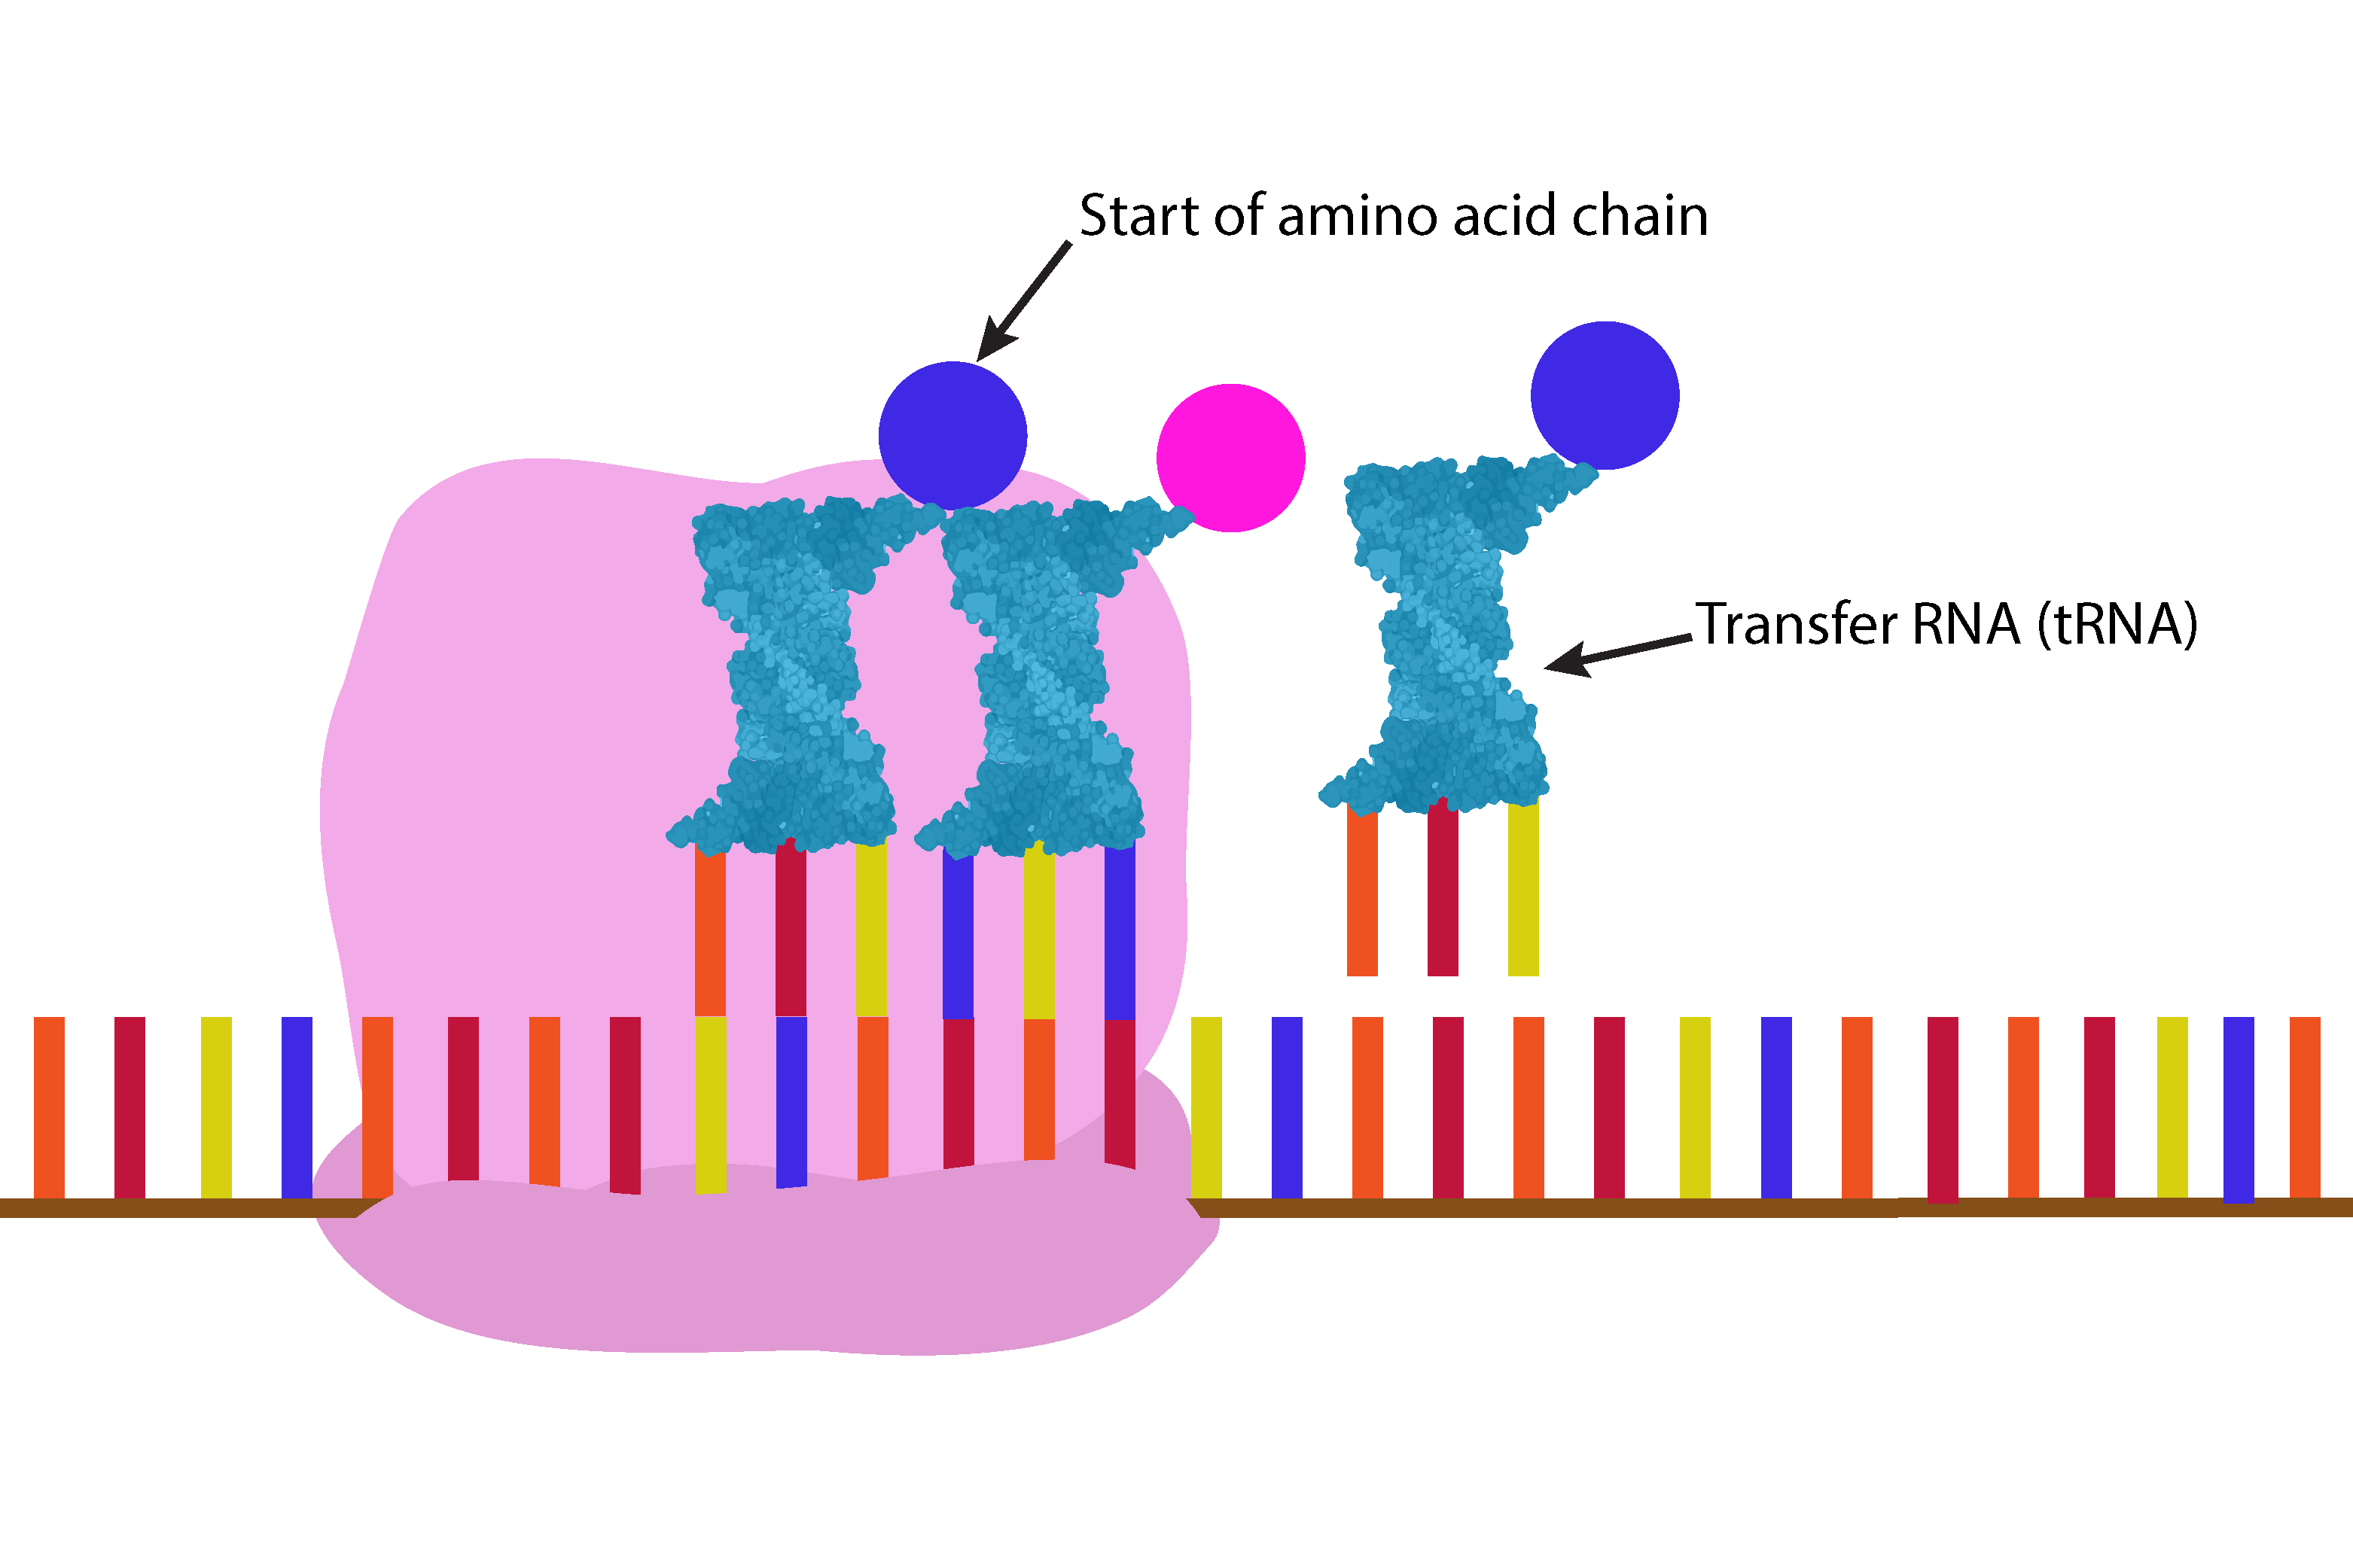 tRNA moves along the mRNA amino acids start to join in the ribosome